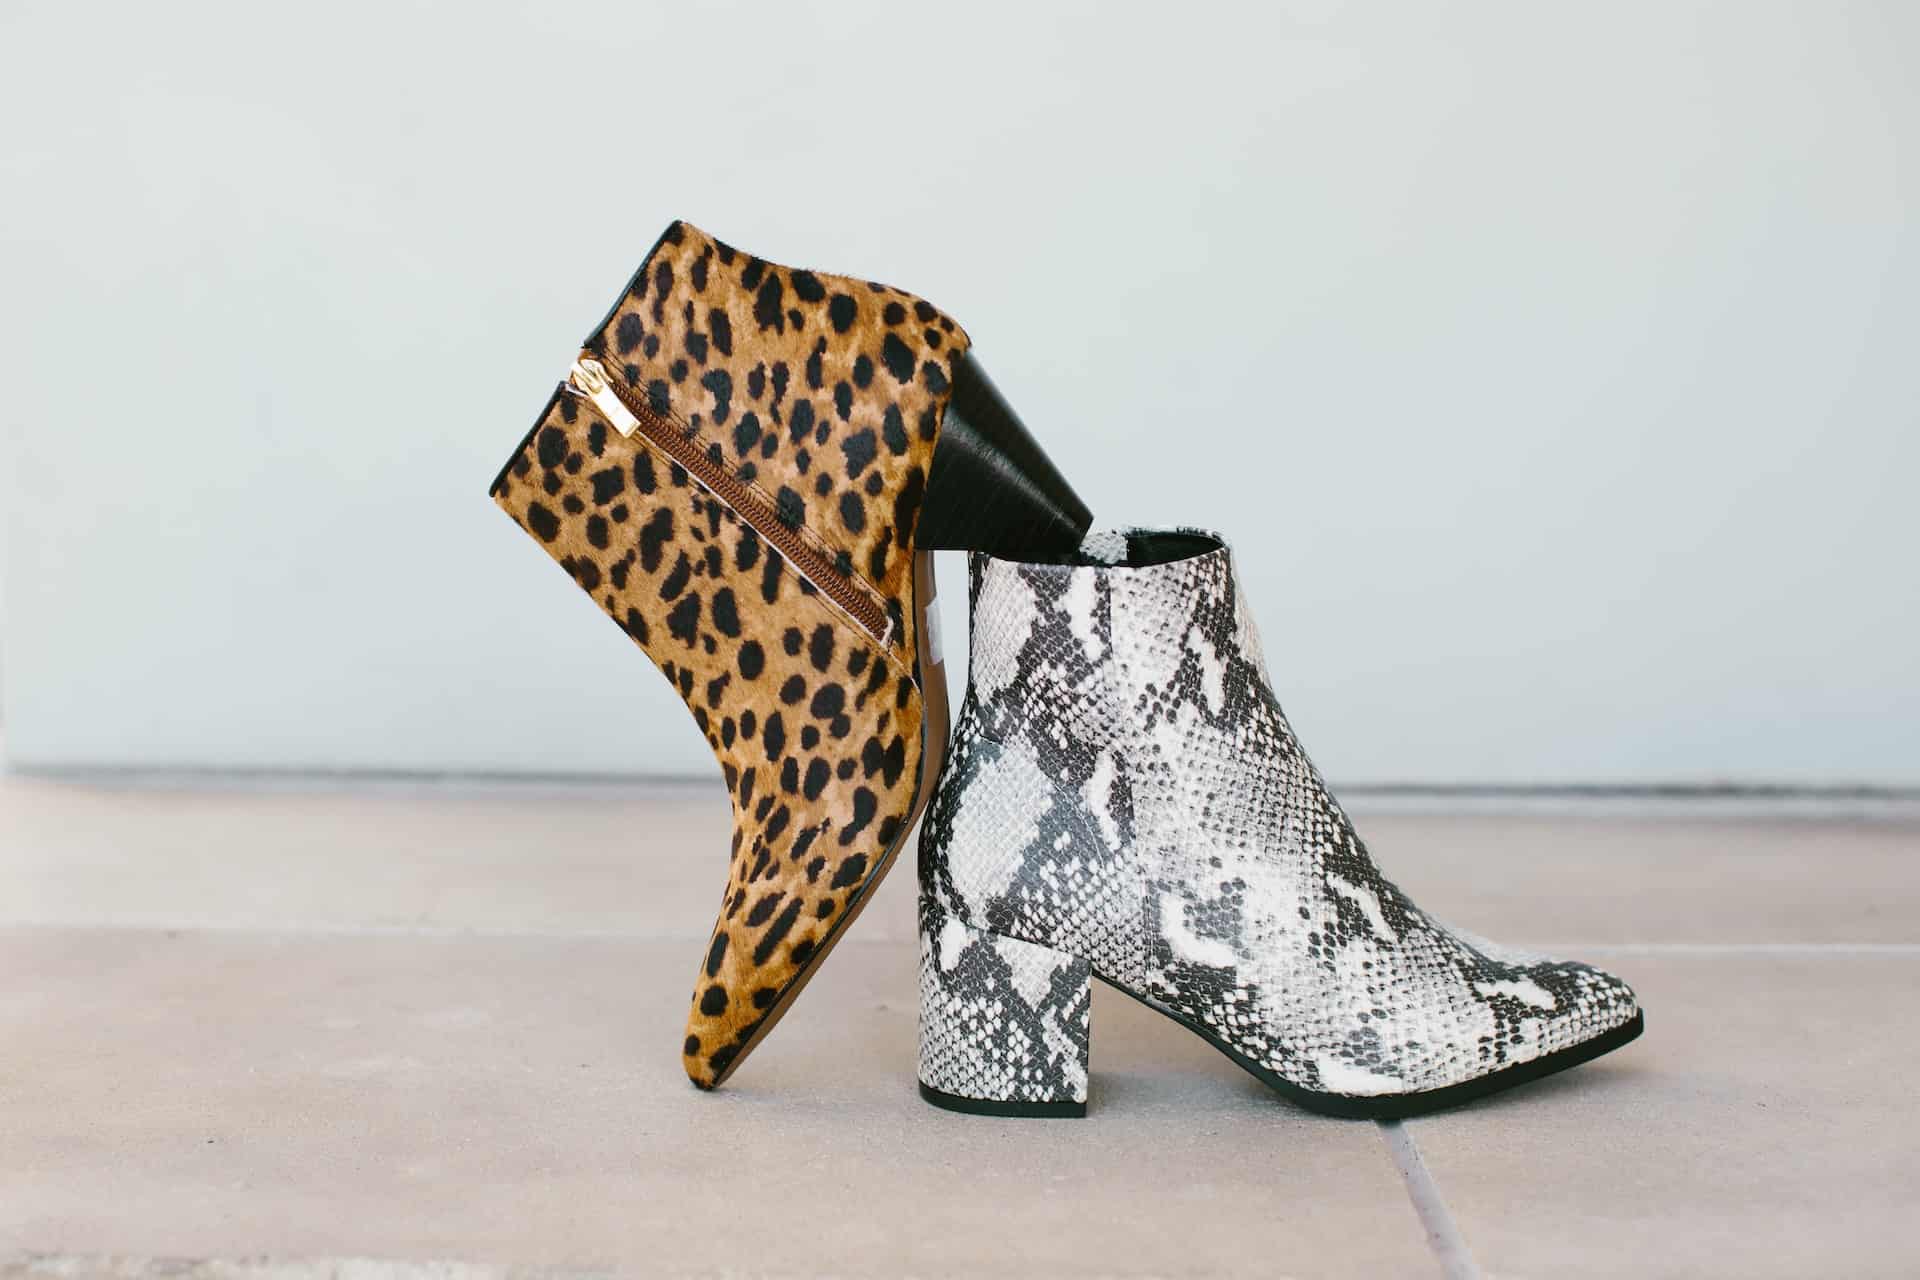 Don’t be a party pooper, step up your game with holographic platform boots!